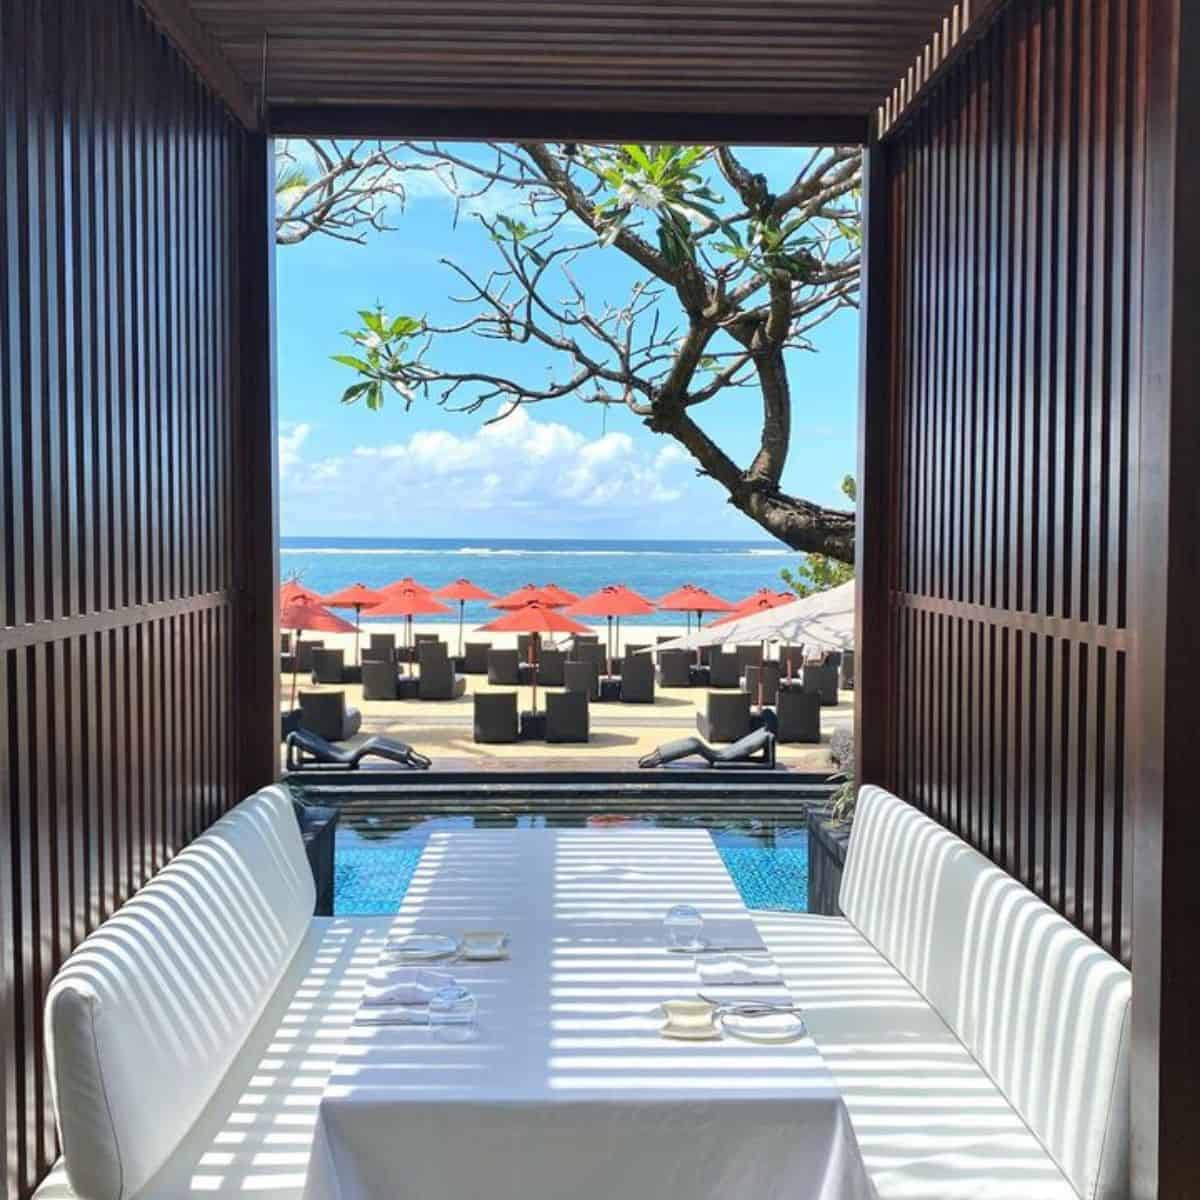 Kayaputi Restaurant’s outdoor dining table in white linen and red beach umbrellas in the front view